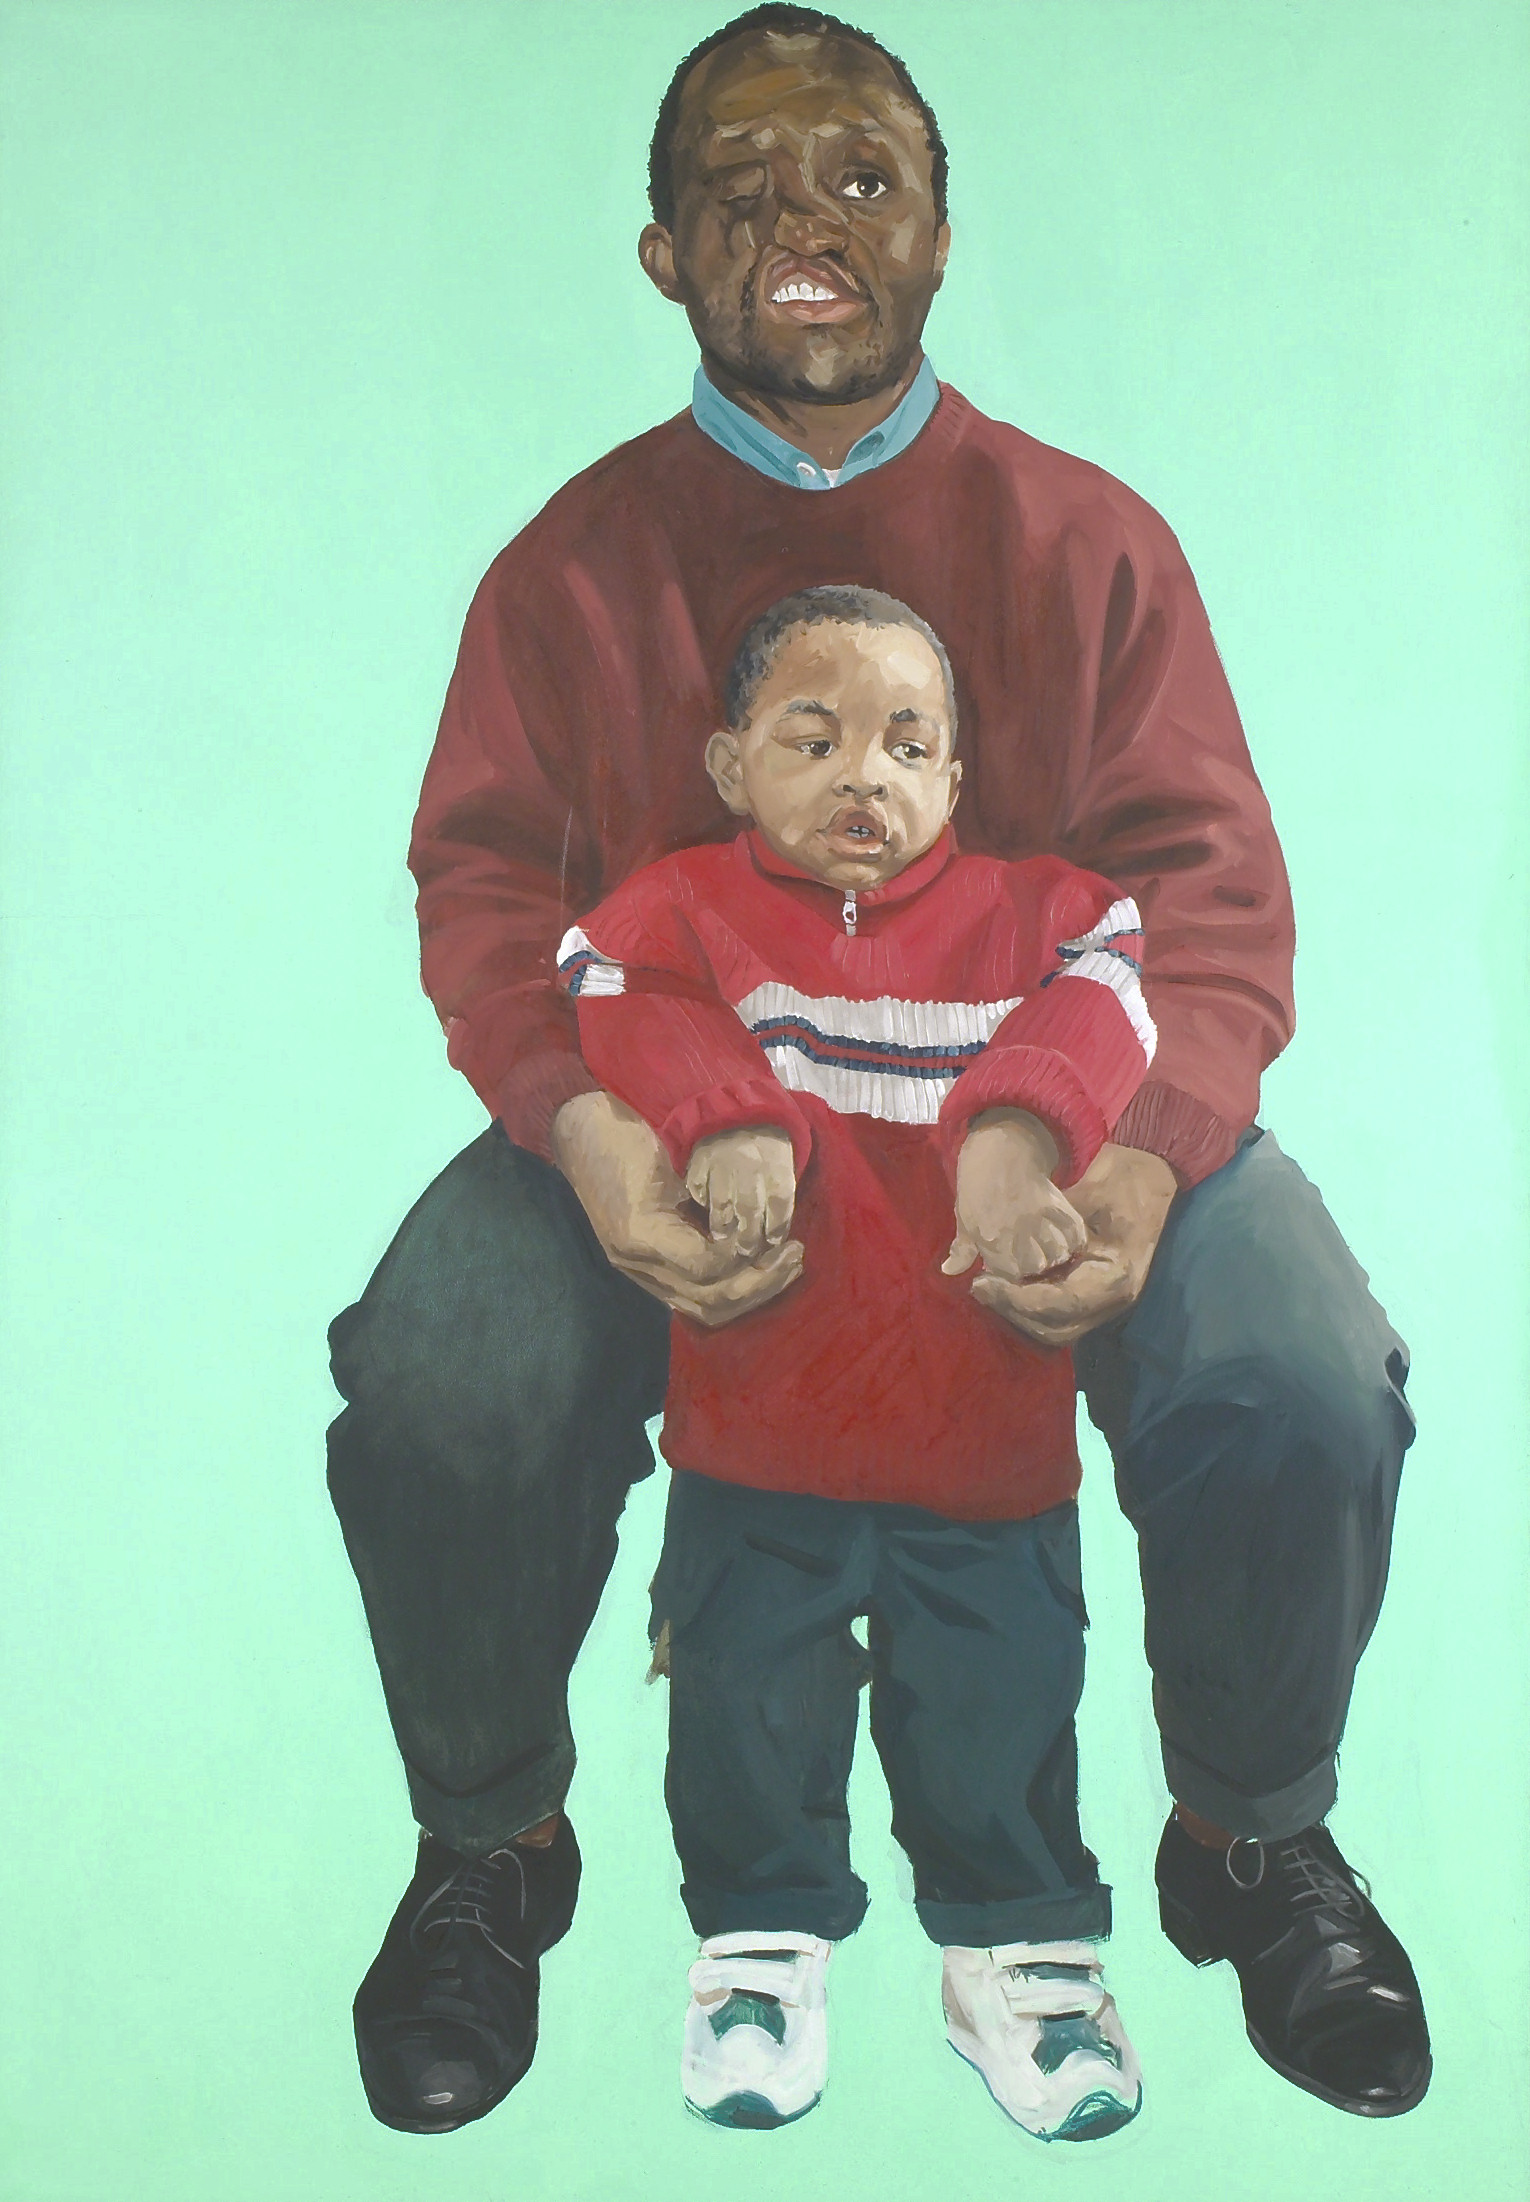 A painting of a man holding a child. The man has a facial desfigurement.